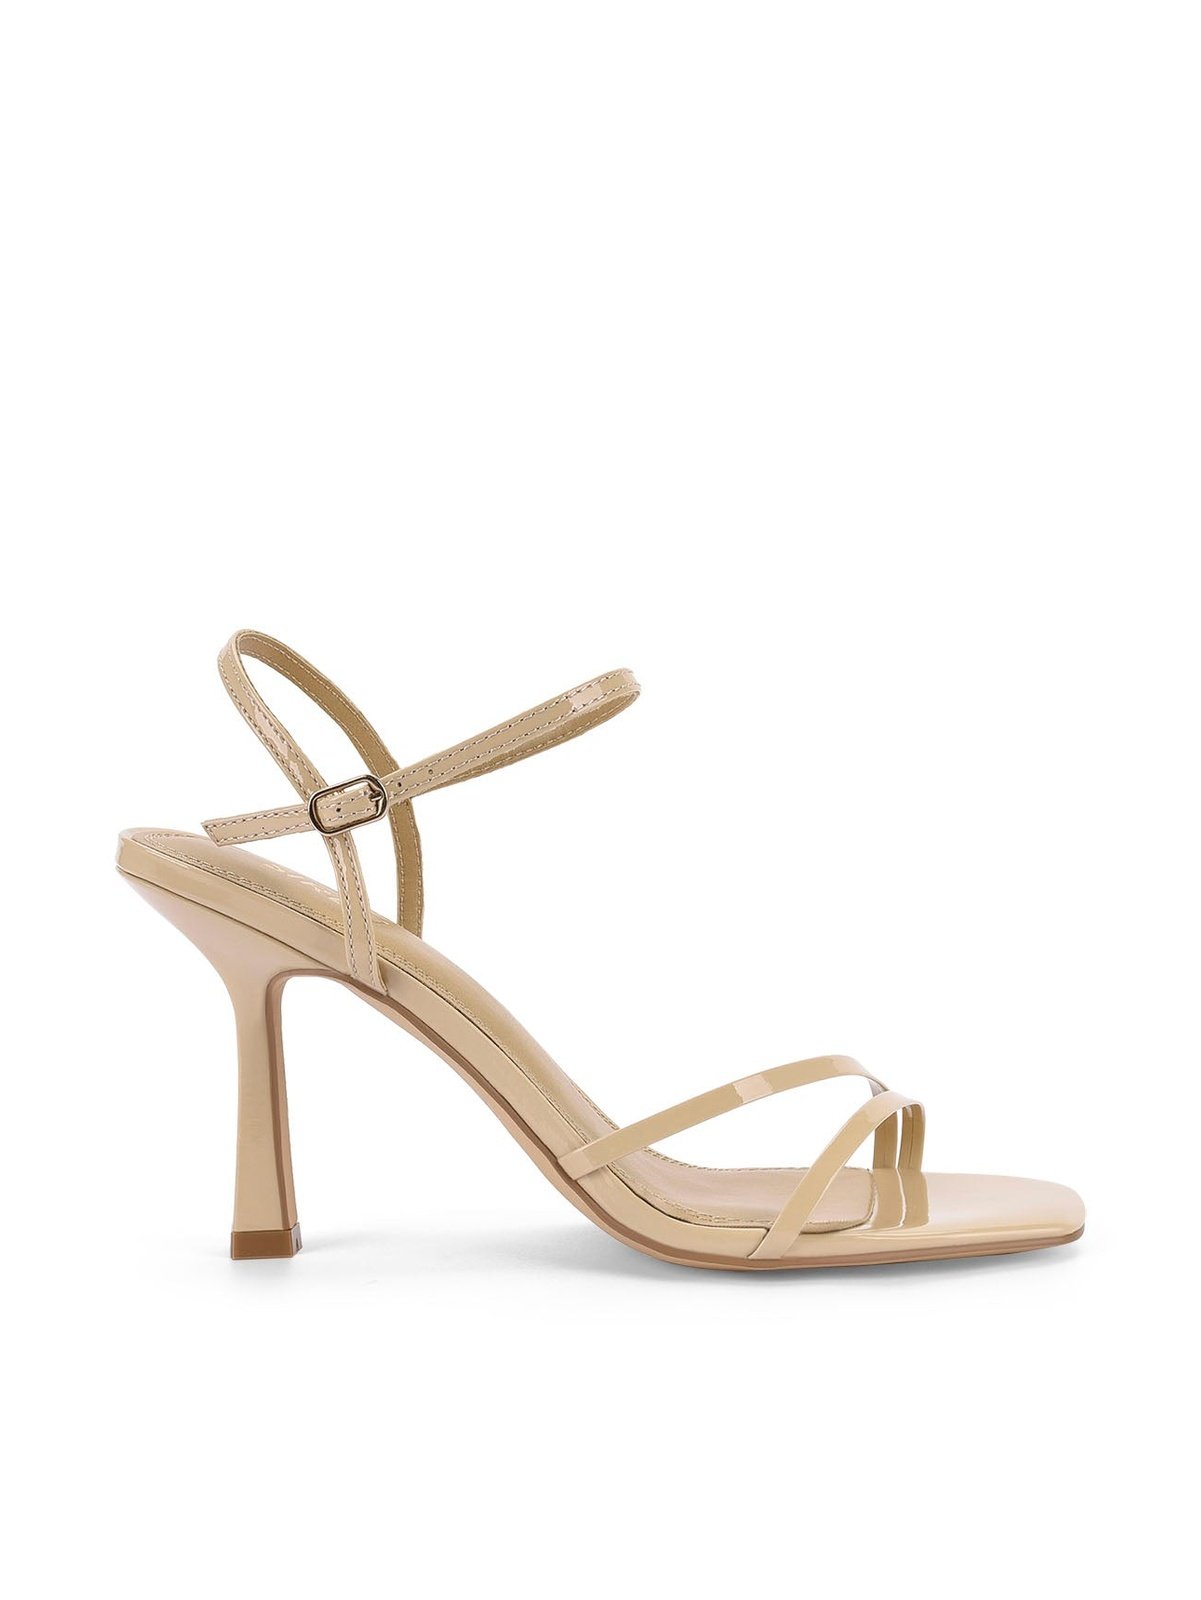 Speck Strappy Heels - Nude Patent Leather